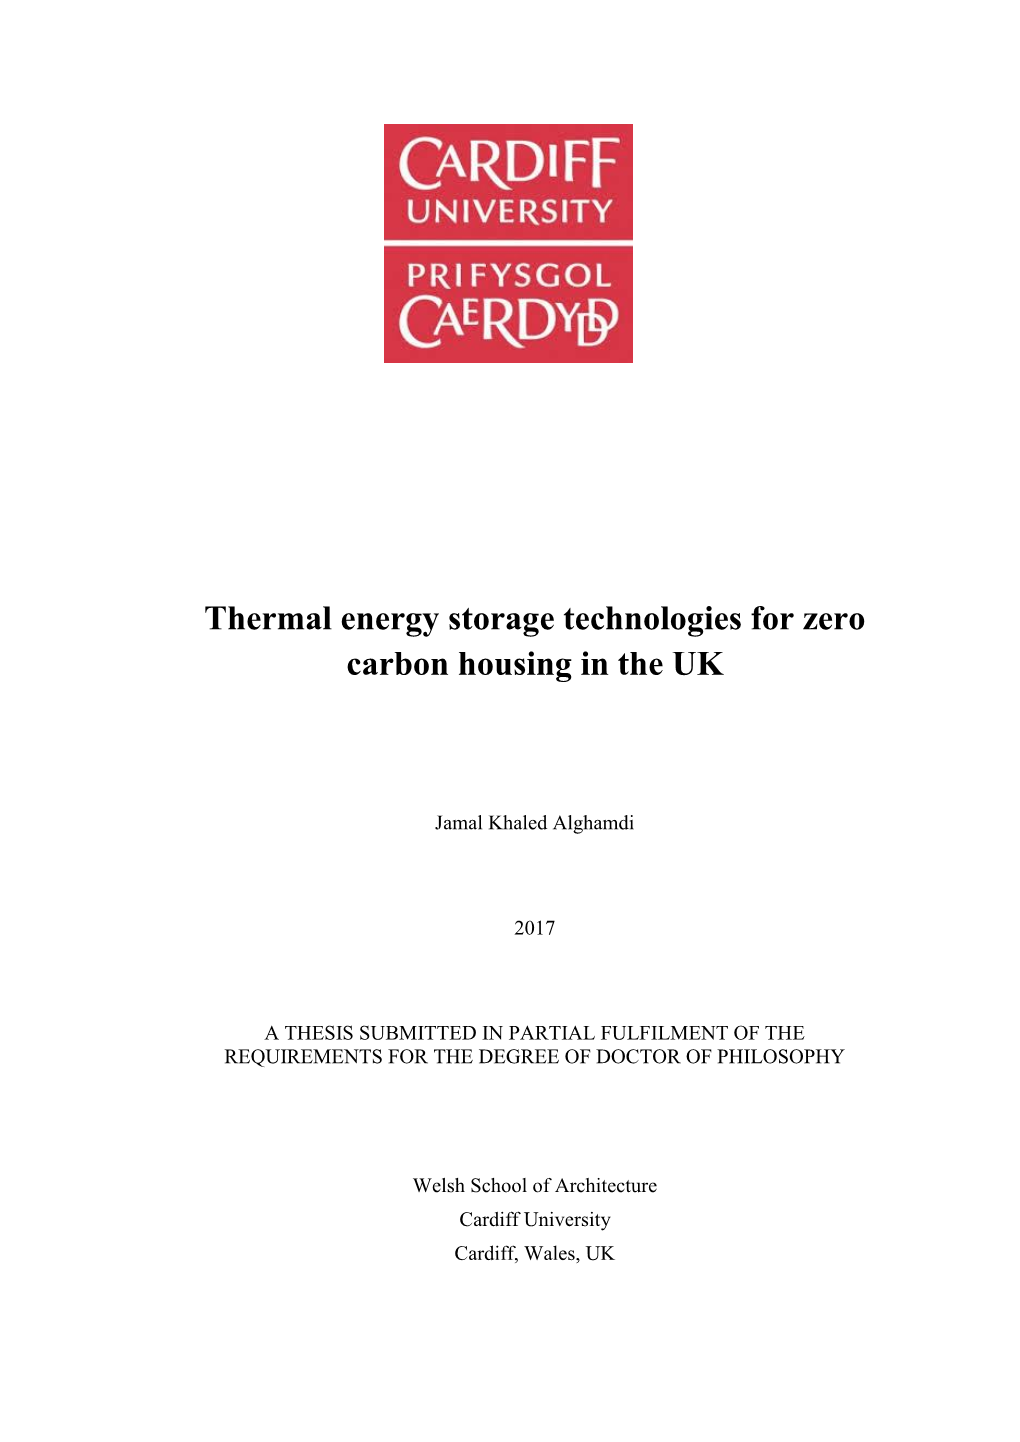 Thermal Energy Storage Technologies for Zero Carbon Housing in the UK